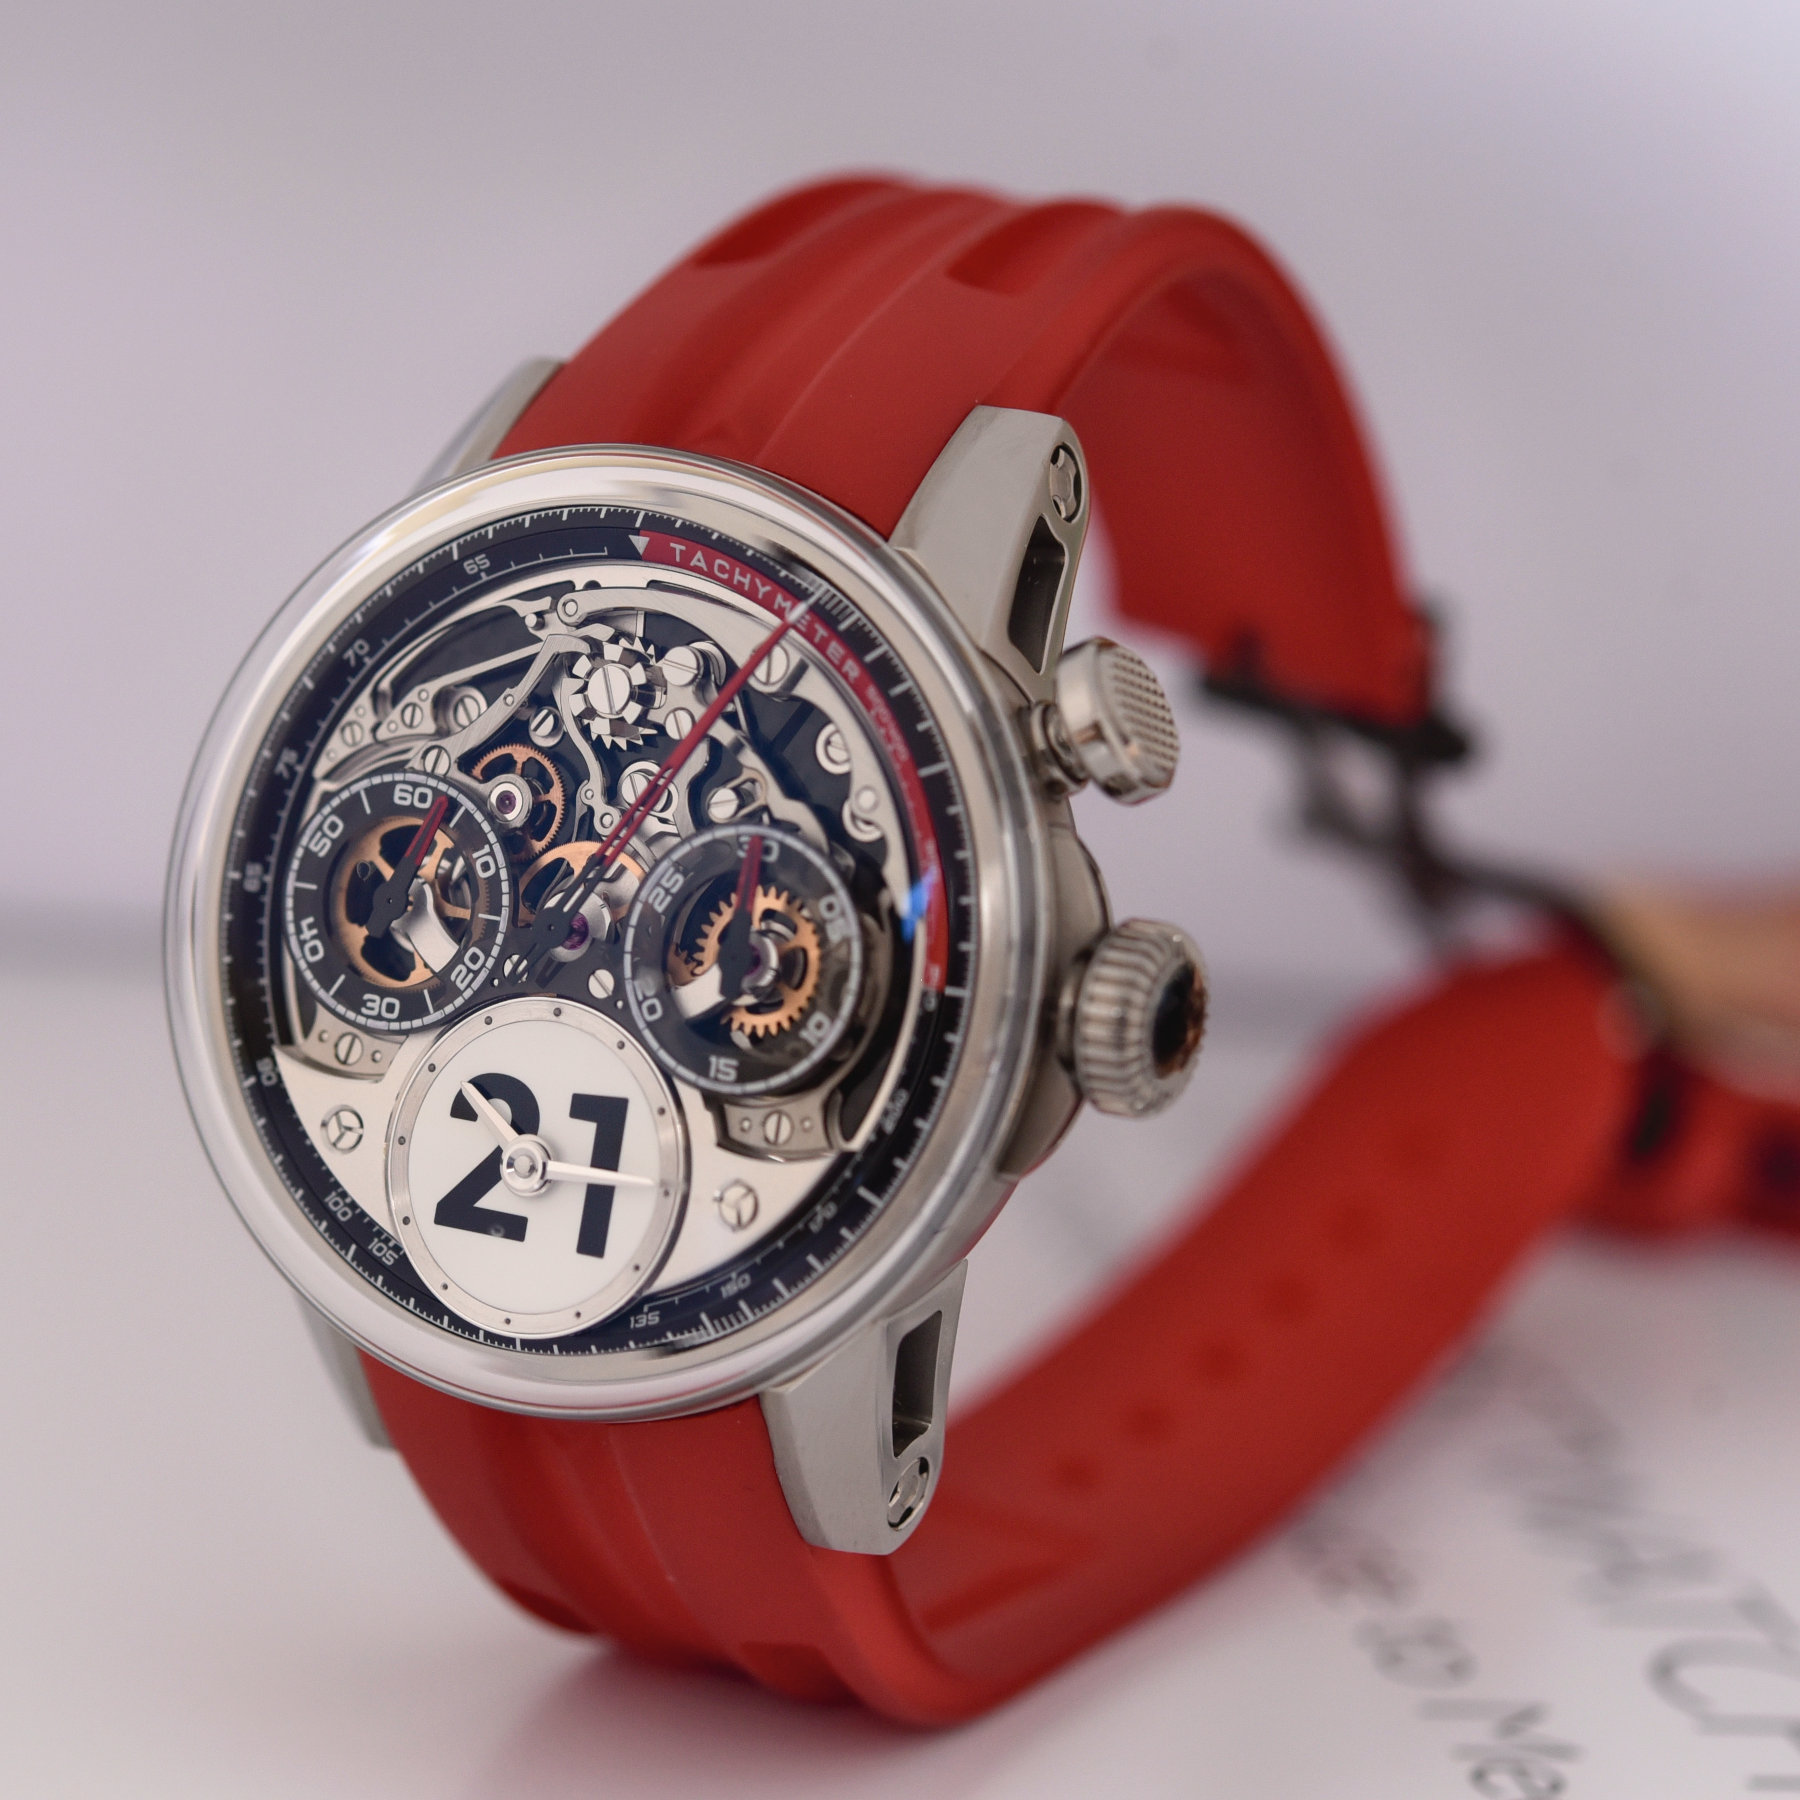 Louis Moinet Time To Race Chronograph Rosso Corsa 1